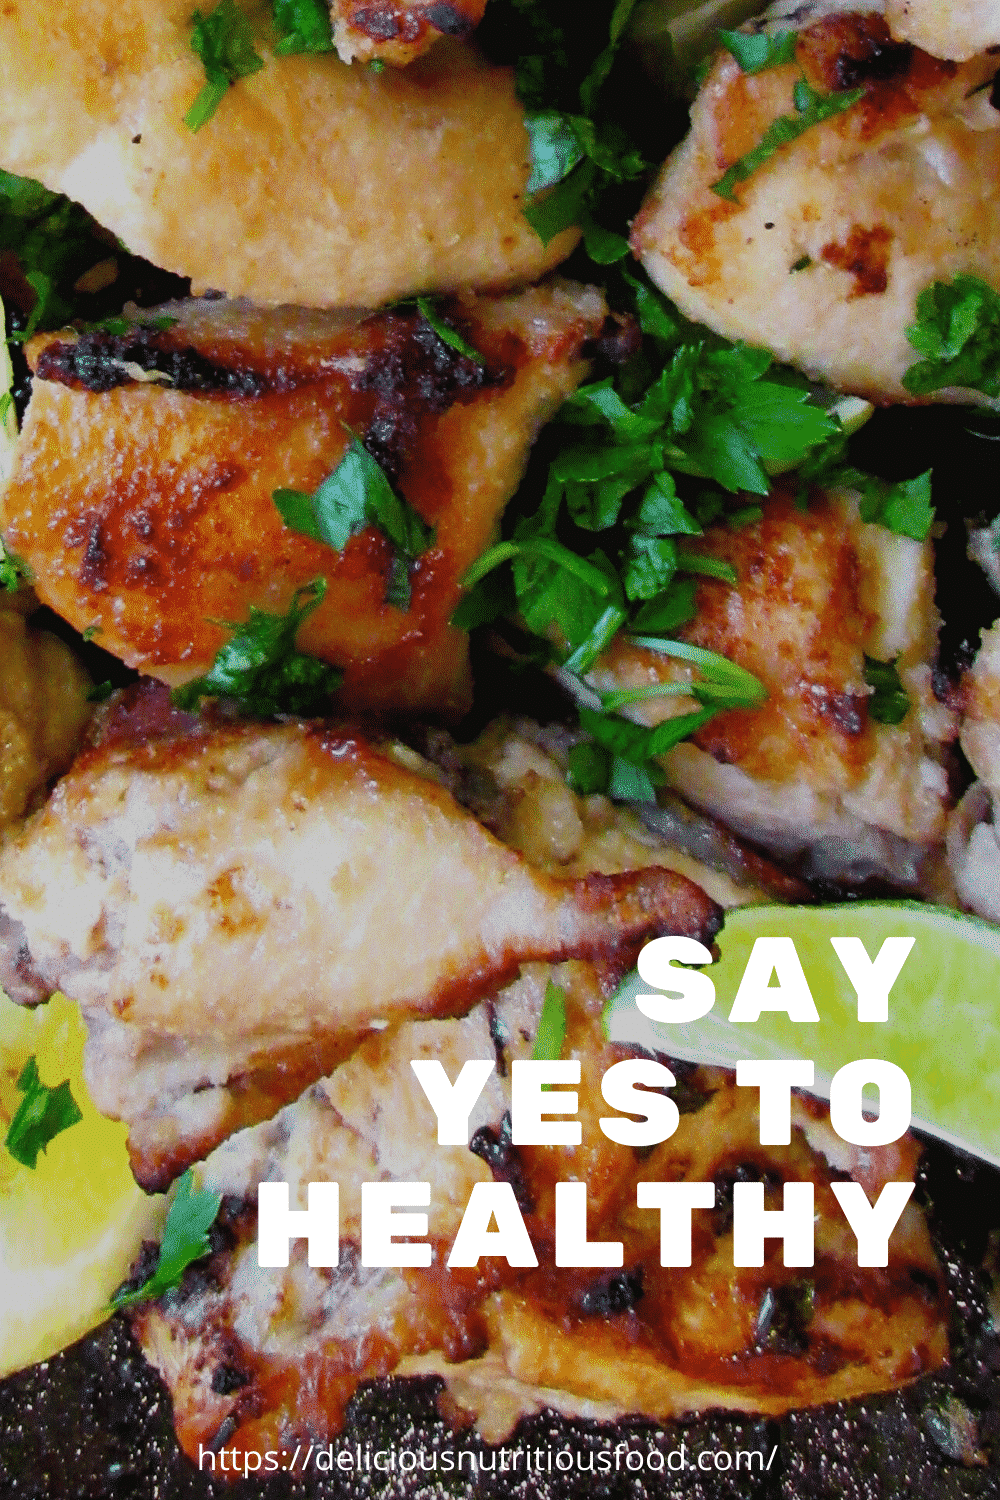 Best grilled chicken in the oven made easy #chickenrecipes #tortillasdinner #Maindishes #maindishesforpotluck #Castironrecipes #deliciousnutritiousfoods  #5ingredientsrecipes #recipesilove #30minutesmeal #healthymaindish #dinner #easylunchrecipe #lunch #chickendinner #chickenlunch #grillingrecipes #grilleddinner #grilledmeals #foodforpicnic #potluckrecipes #foodpotluck #boxlunch #bestgrilledchickenrecipes #chickenrecipesgrilledhealthy #thebestgrilledchicken #sheetpanchickenrecipe #homemade
#festingathome #crispygrilledchicken #howmakegrilledchickenathomeinoven #grilledchickencastironoven #grillchickenpiecesinoven #grilledchickenusingoven #bestgrilledchickenrecip #chickentacorecipe #grilledchickencastironoven